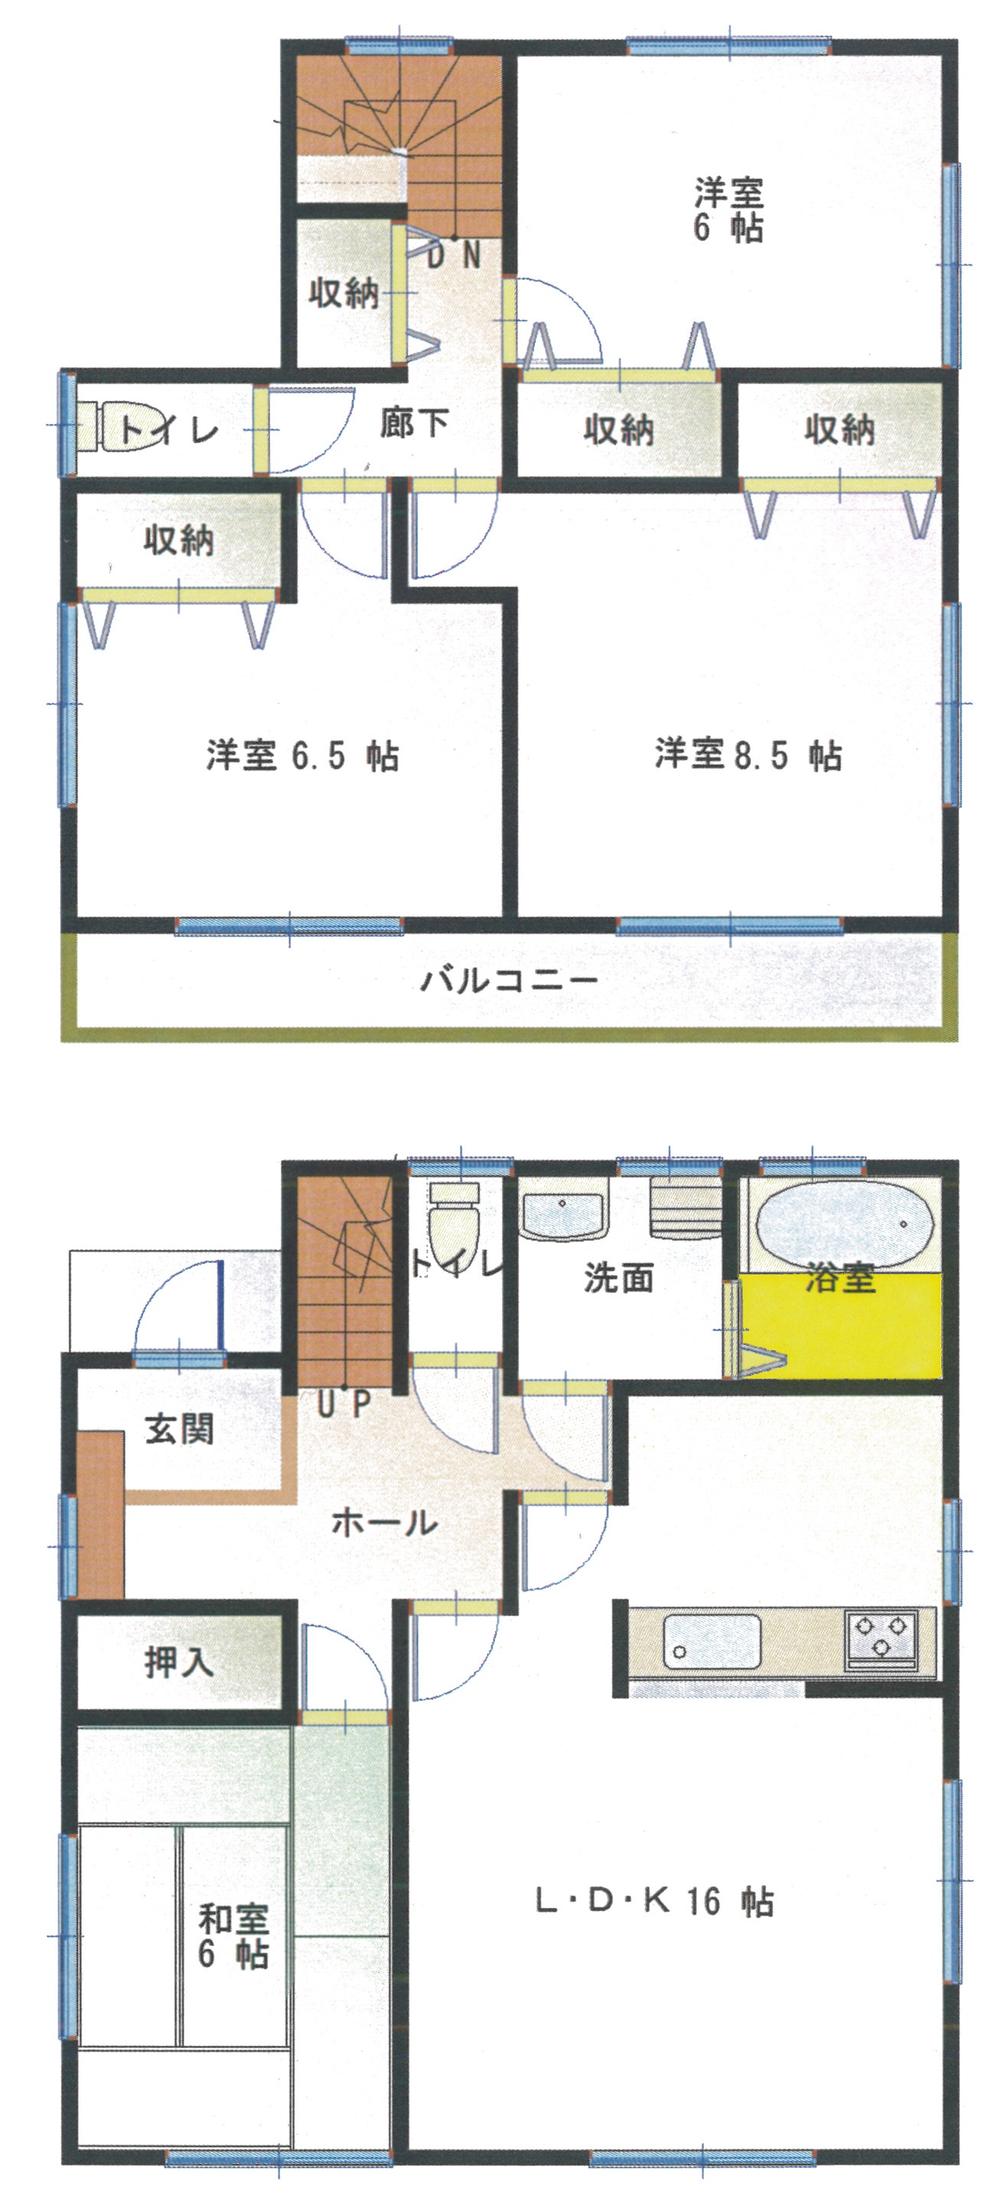 Floor plan. 17.8 million yen, 4LDK, Land area 201.04 sq m , If the building area 105.15 sq m drawings and the present situation is different, it has a priority to the present situation. 